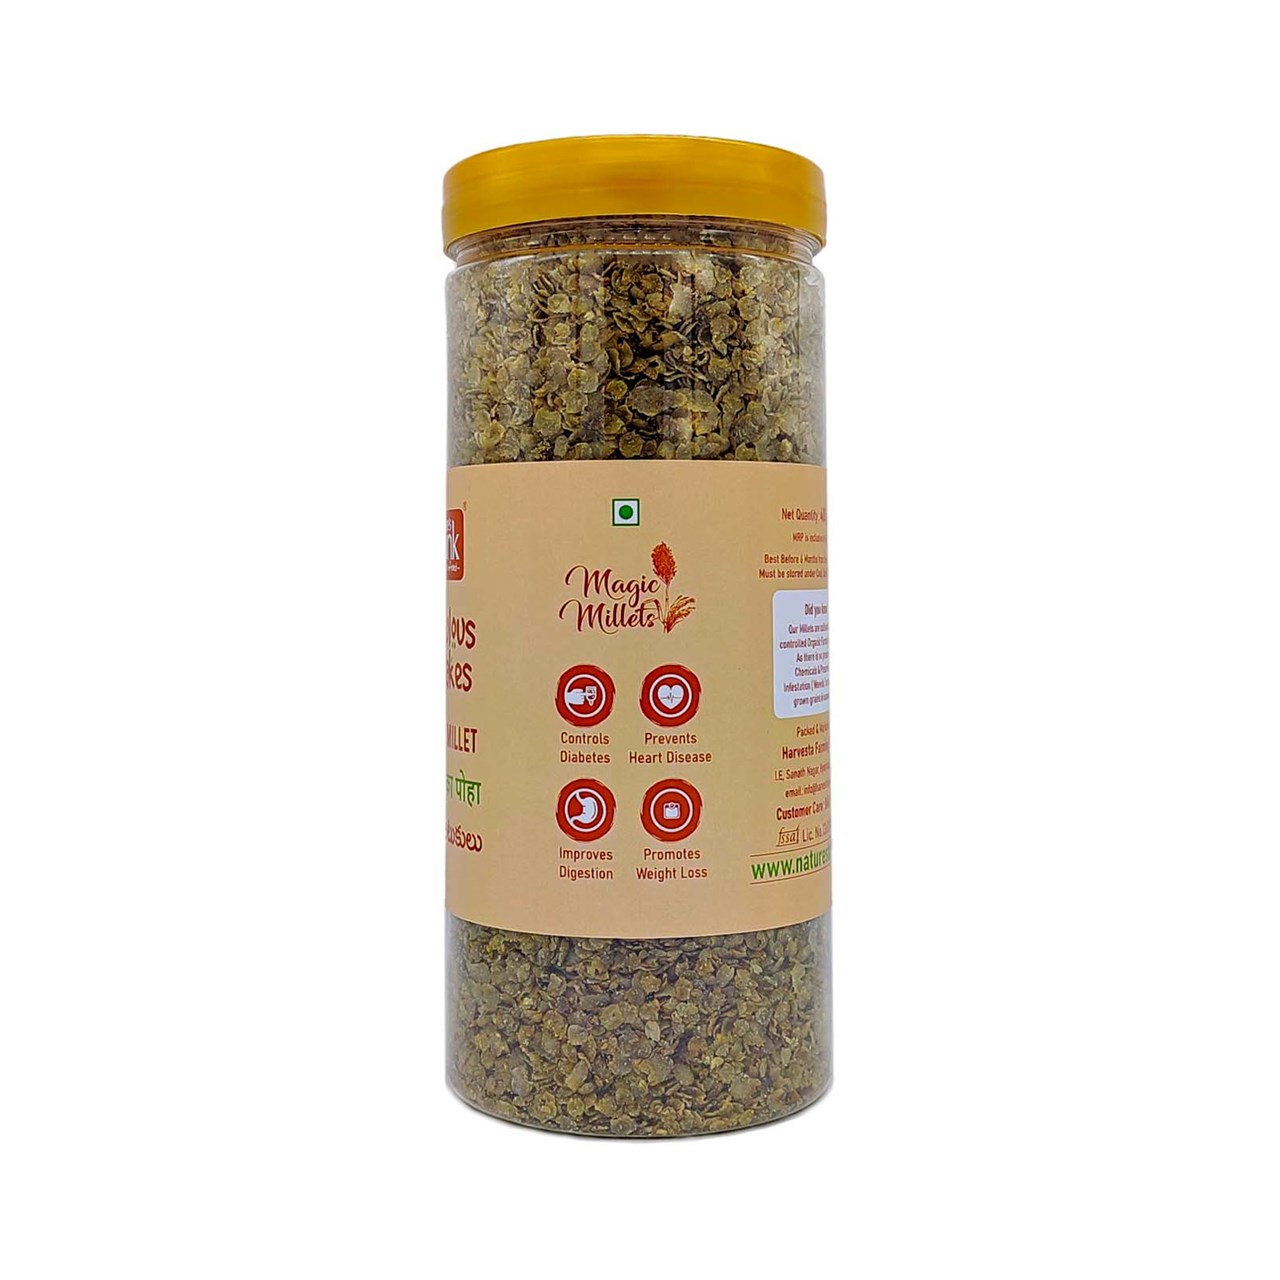 Picture of Pearl Millet Flakes ( Bajra / Sajjalu ) 400 g